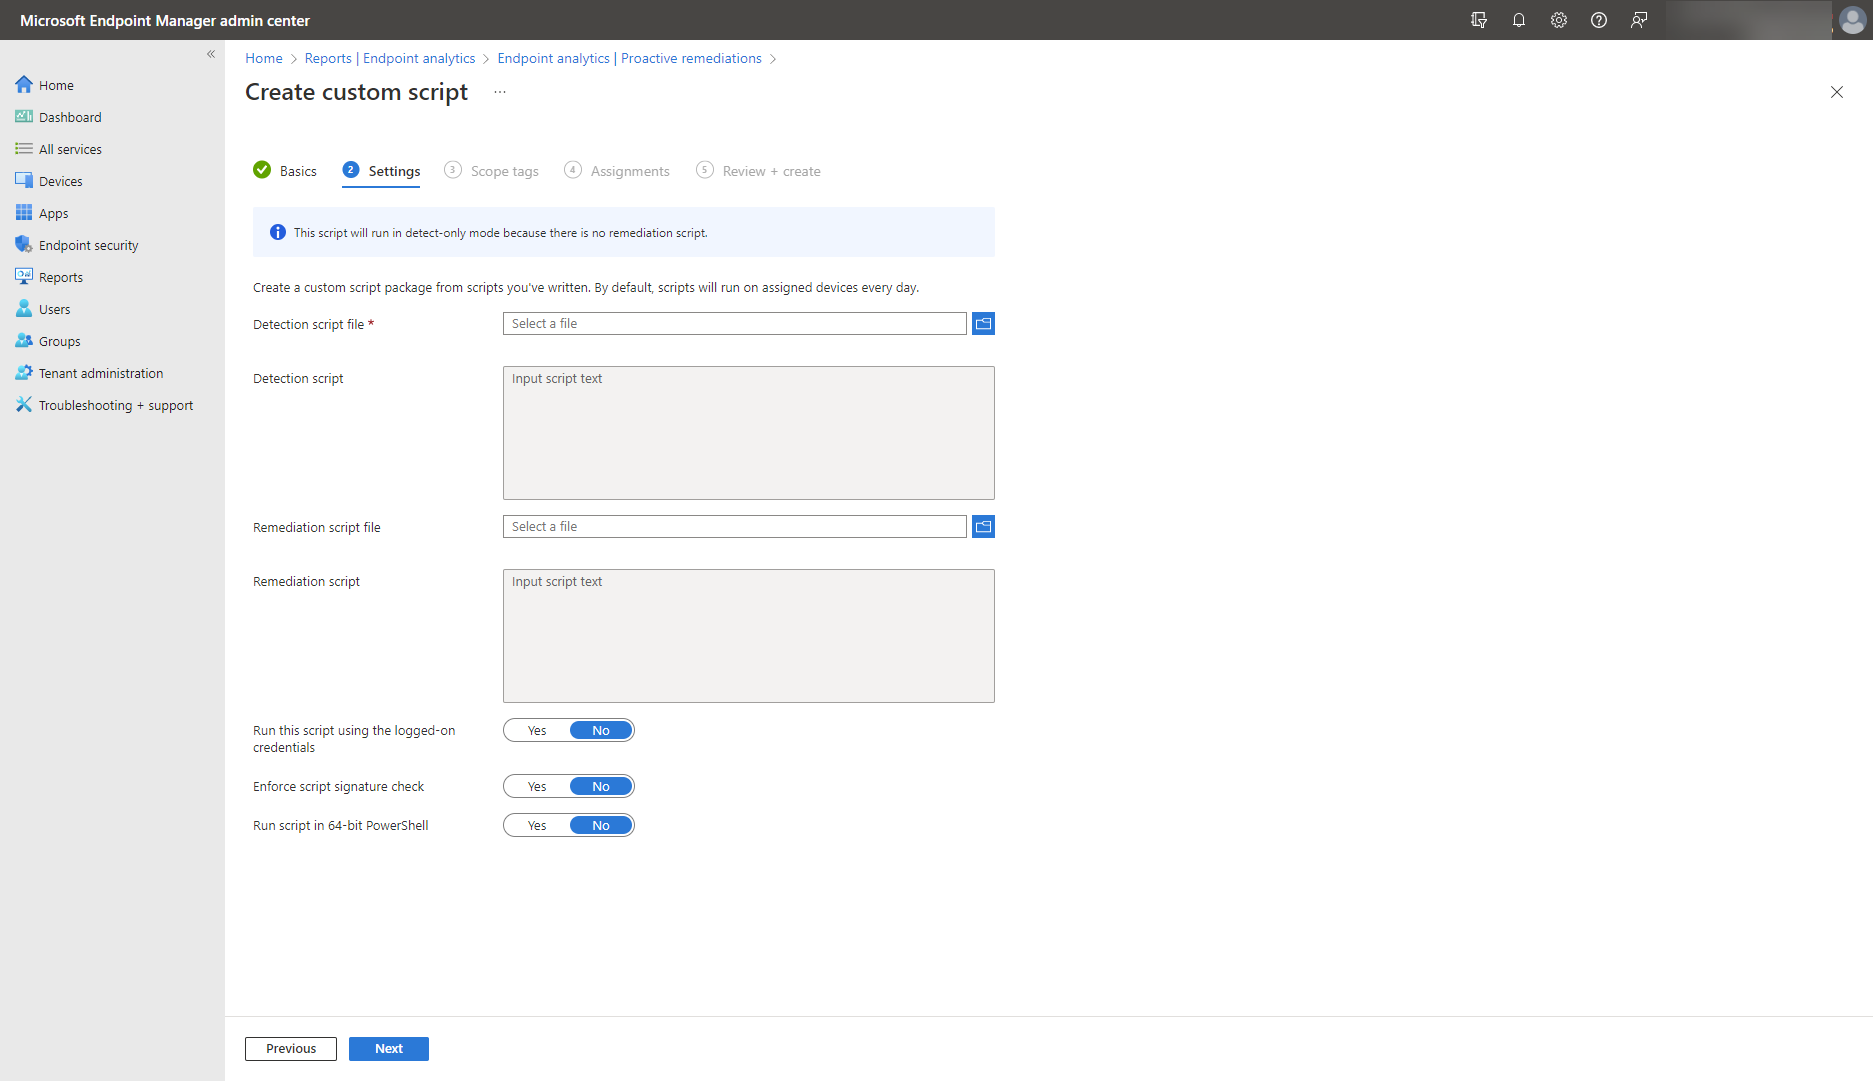 A screenshot shows the Endpoint analytics view in Microsoft Intune, focused on how to create a custom script.